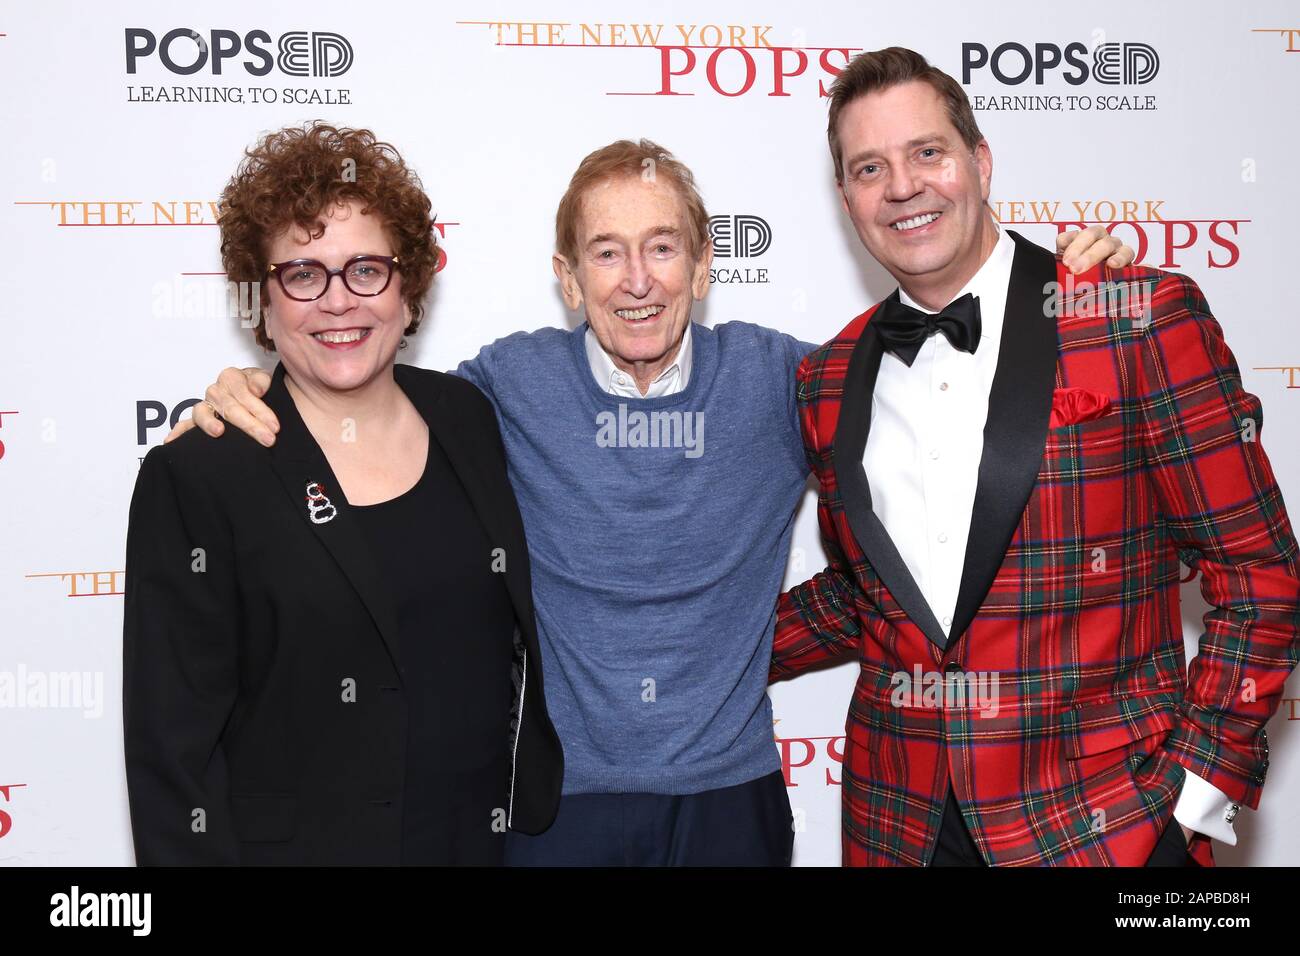 Backstage after a performance of New York Pops: A Frank and Ella Christmas at Carnegie Hall. Featuring: Judith Clurman, Bob McGrath, Steven Reineke Where: New York, New York, United States When: 22 Dec 2019 Credit: Joseph Marzullo/WENN.com Stock Photo